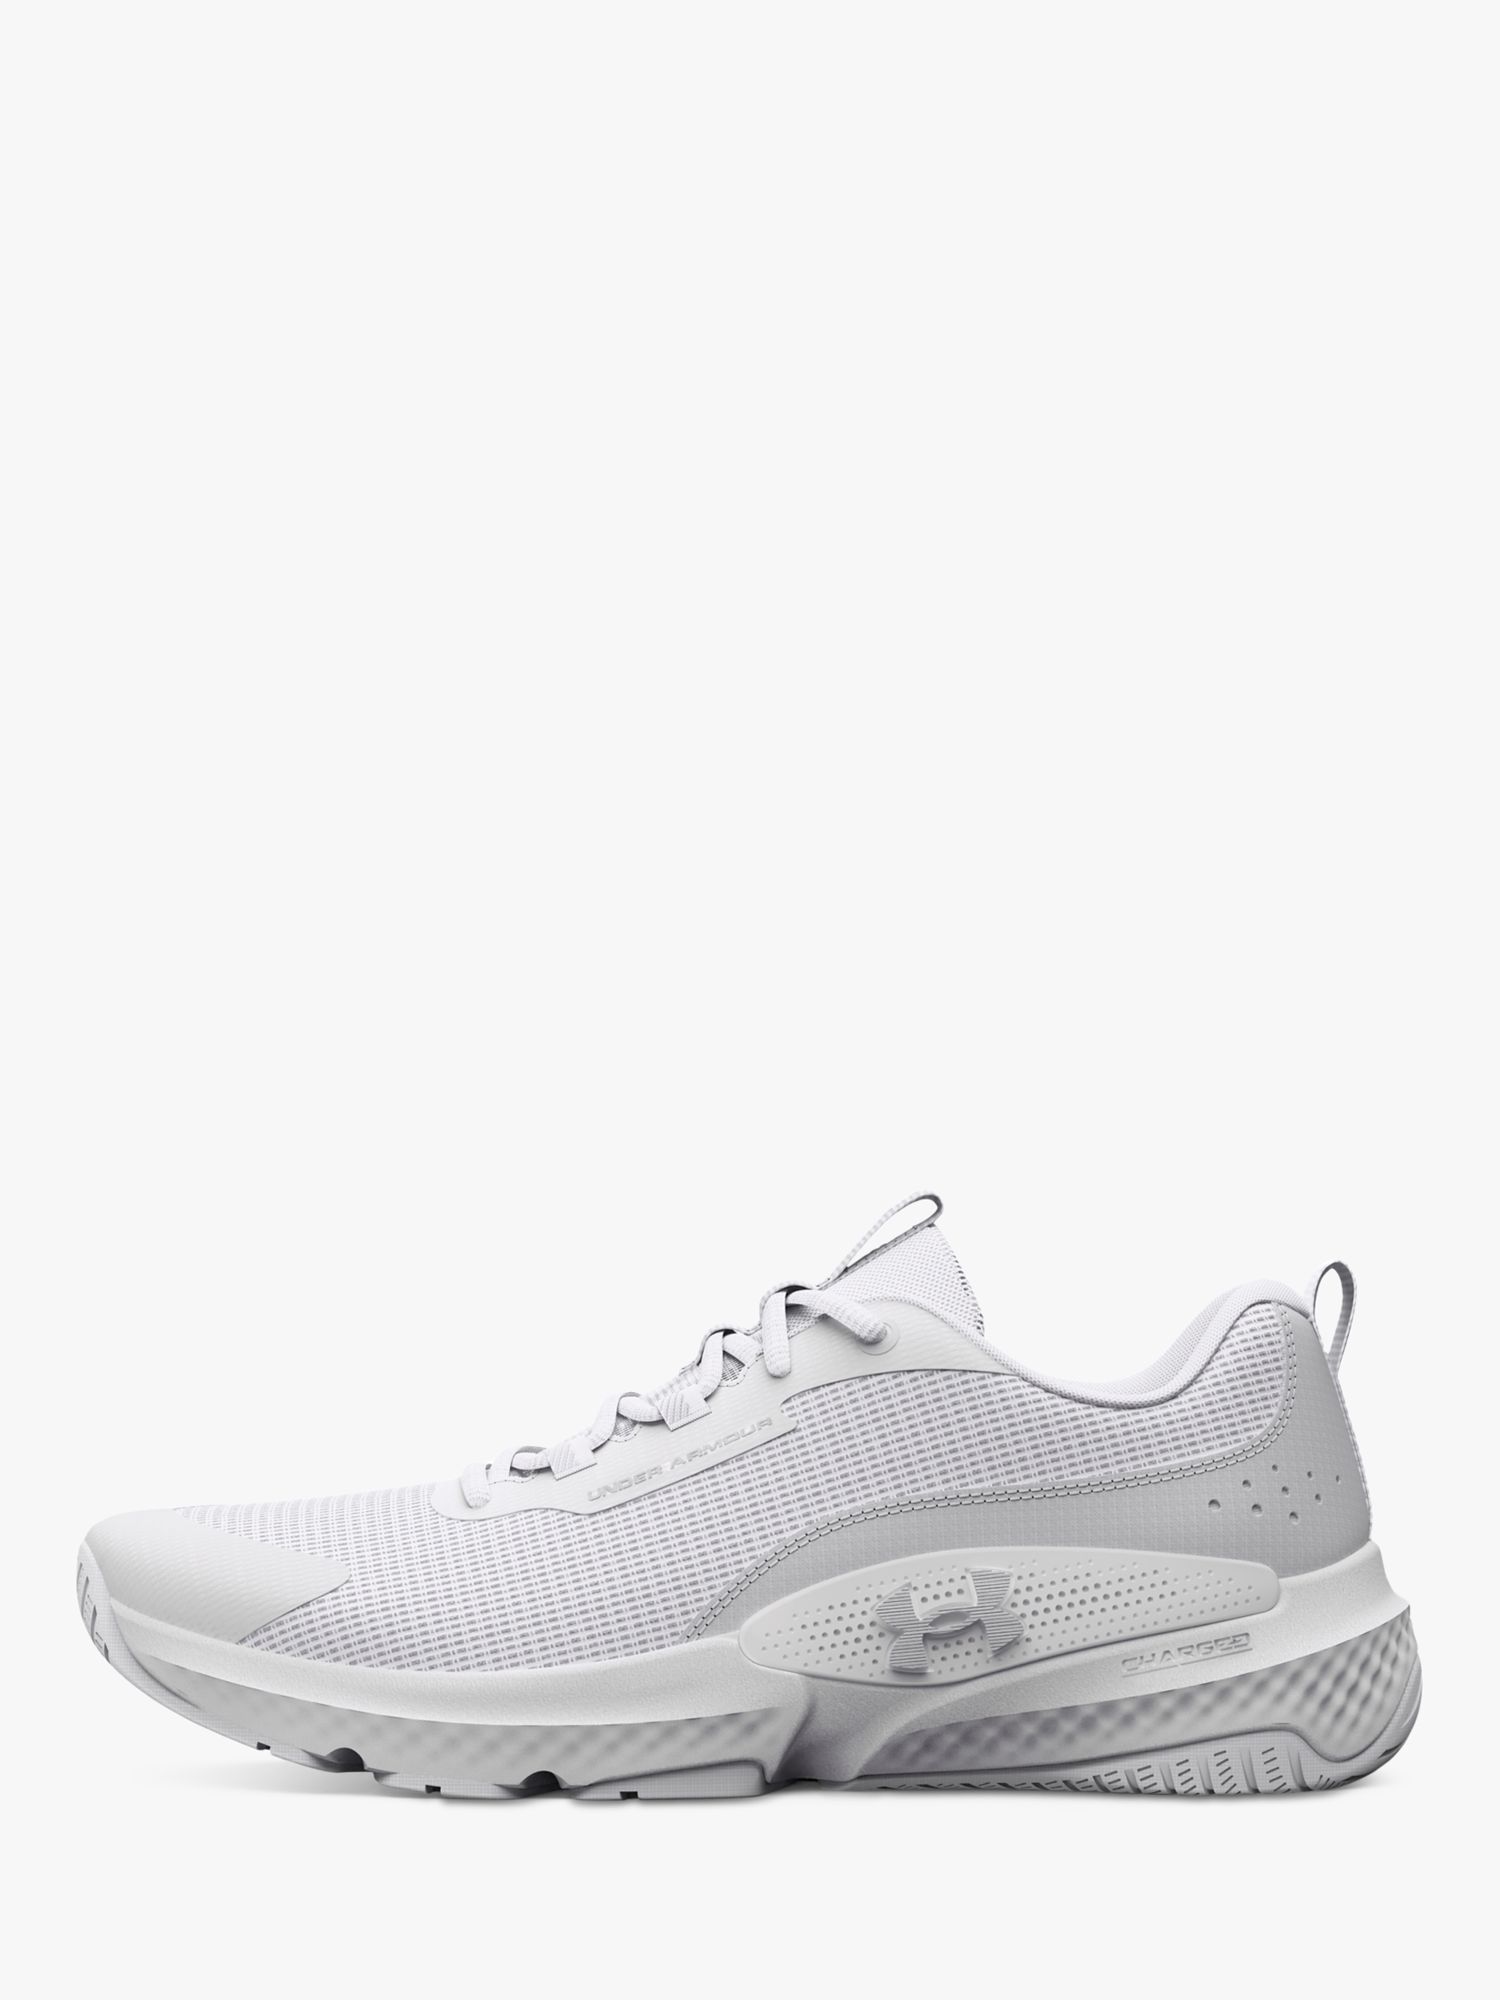 Buy Under Armour Dynamic Select Men's Cross Trainers Online at johnlewis.com